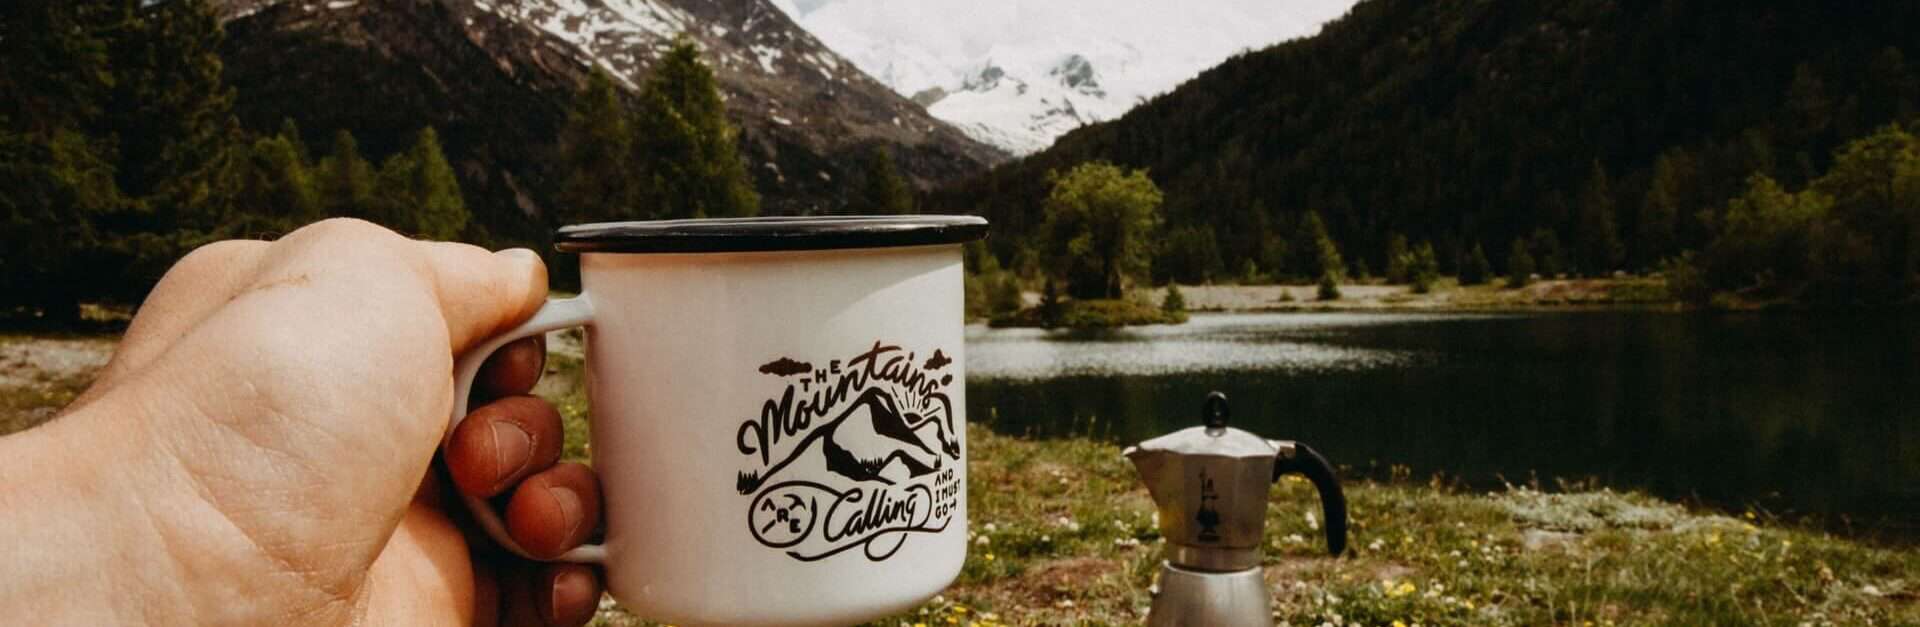 A mug and coffee pot in the wilderness